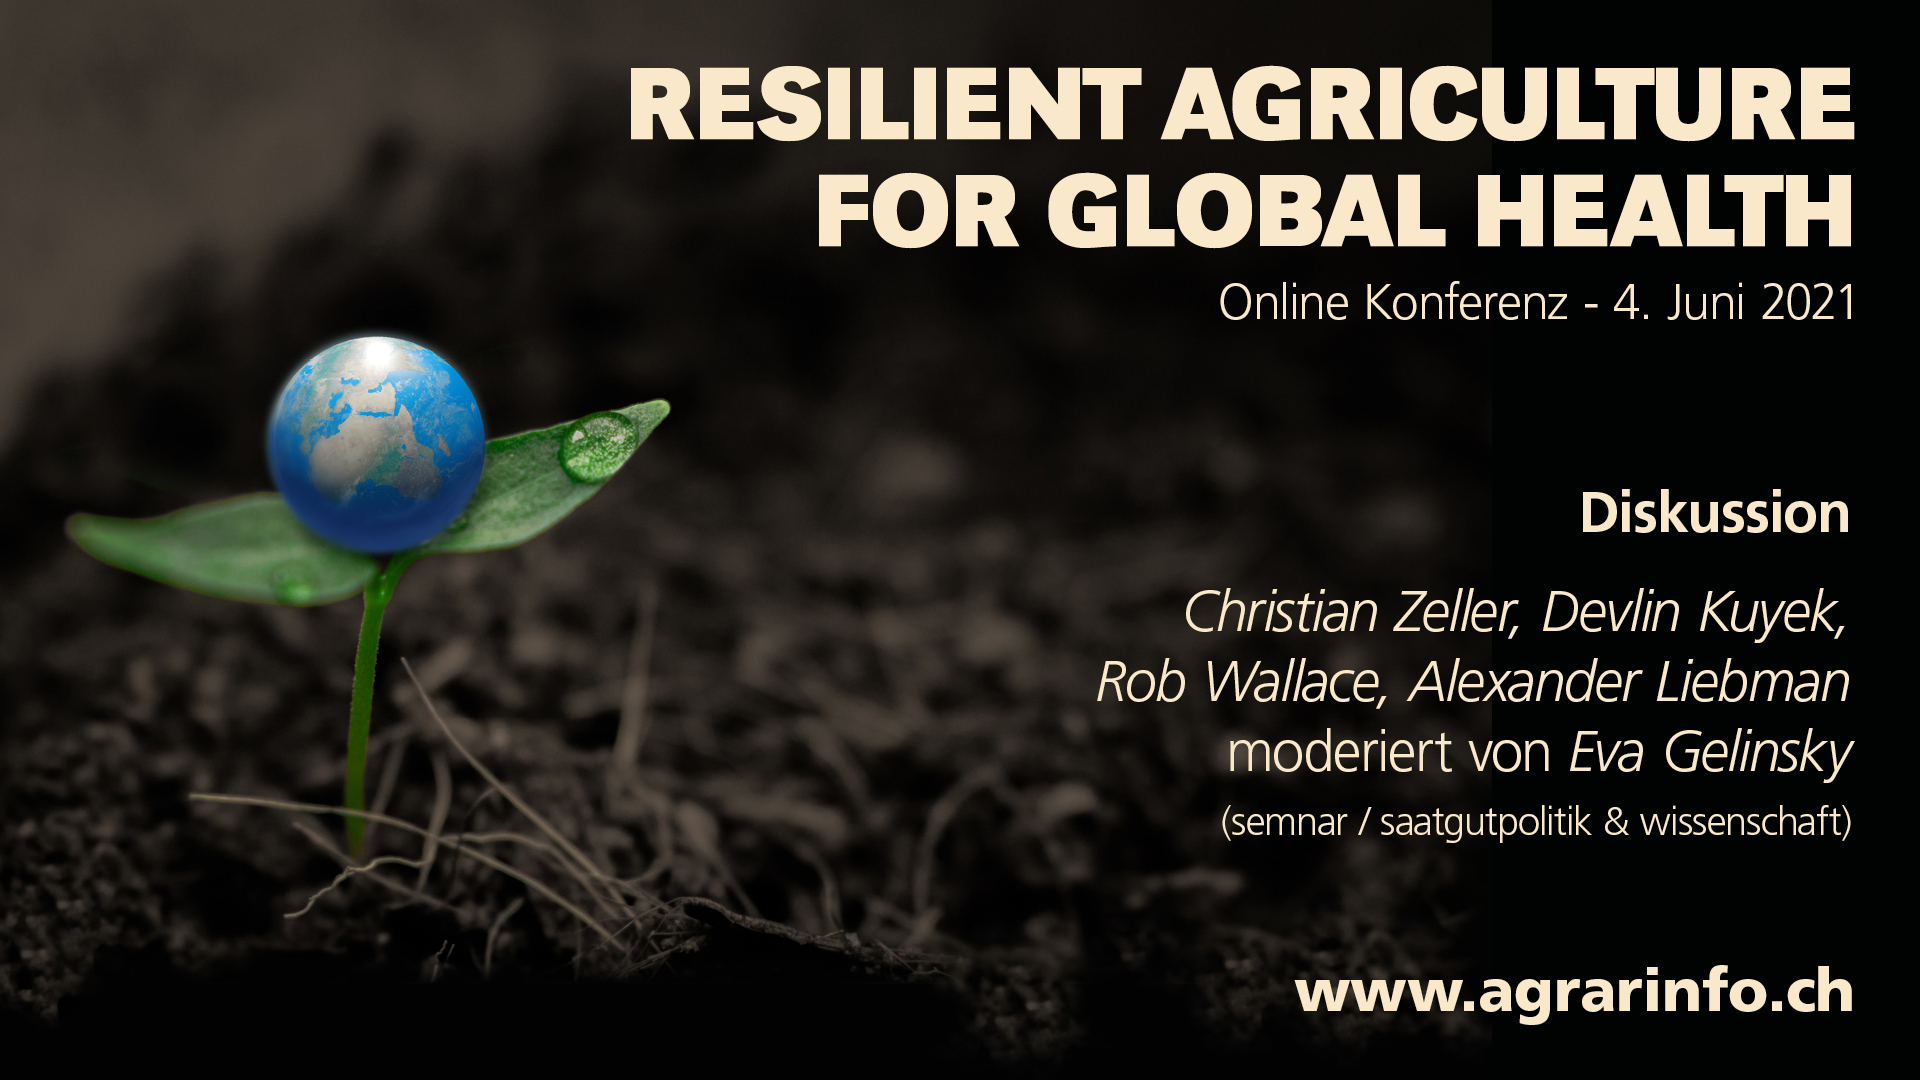 Resilient agriculture for global health